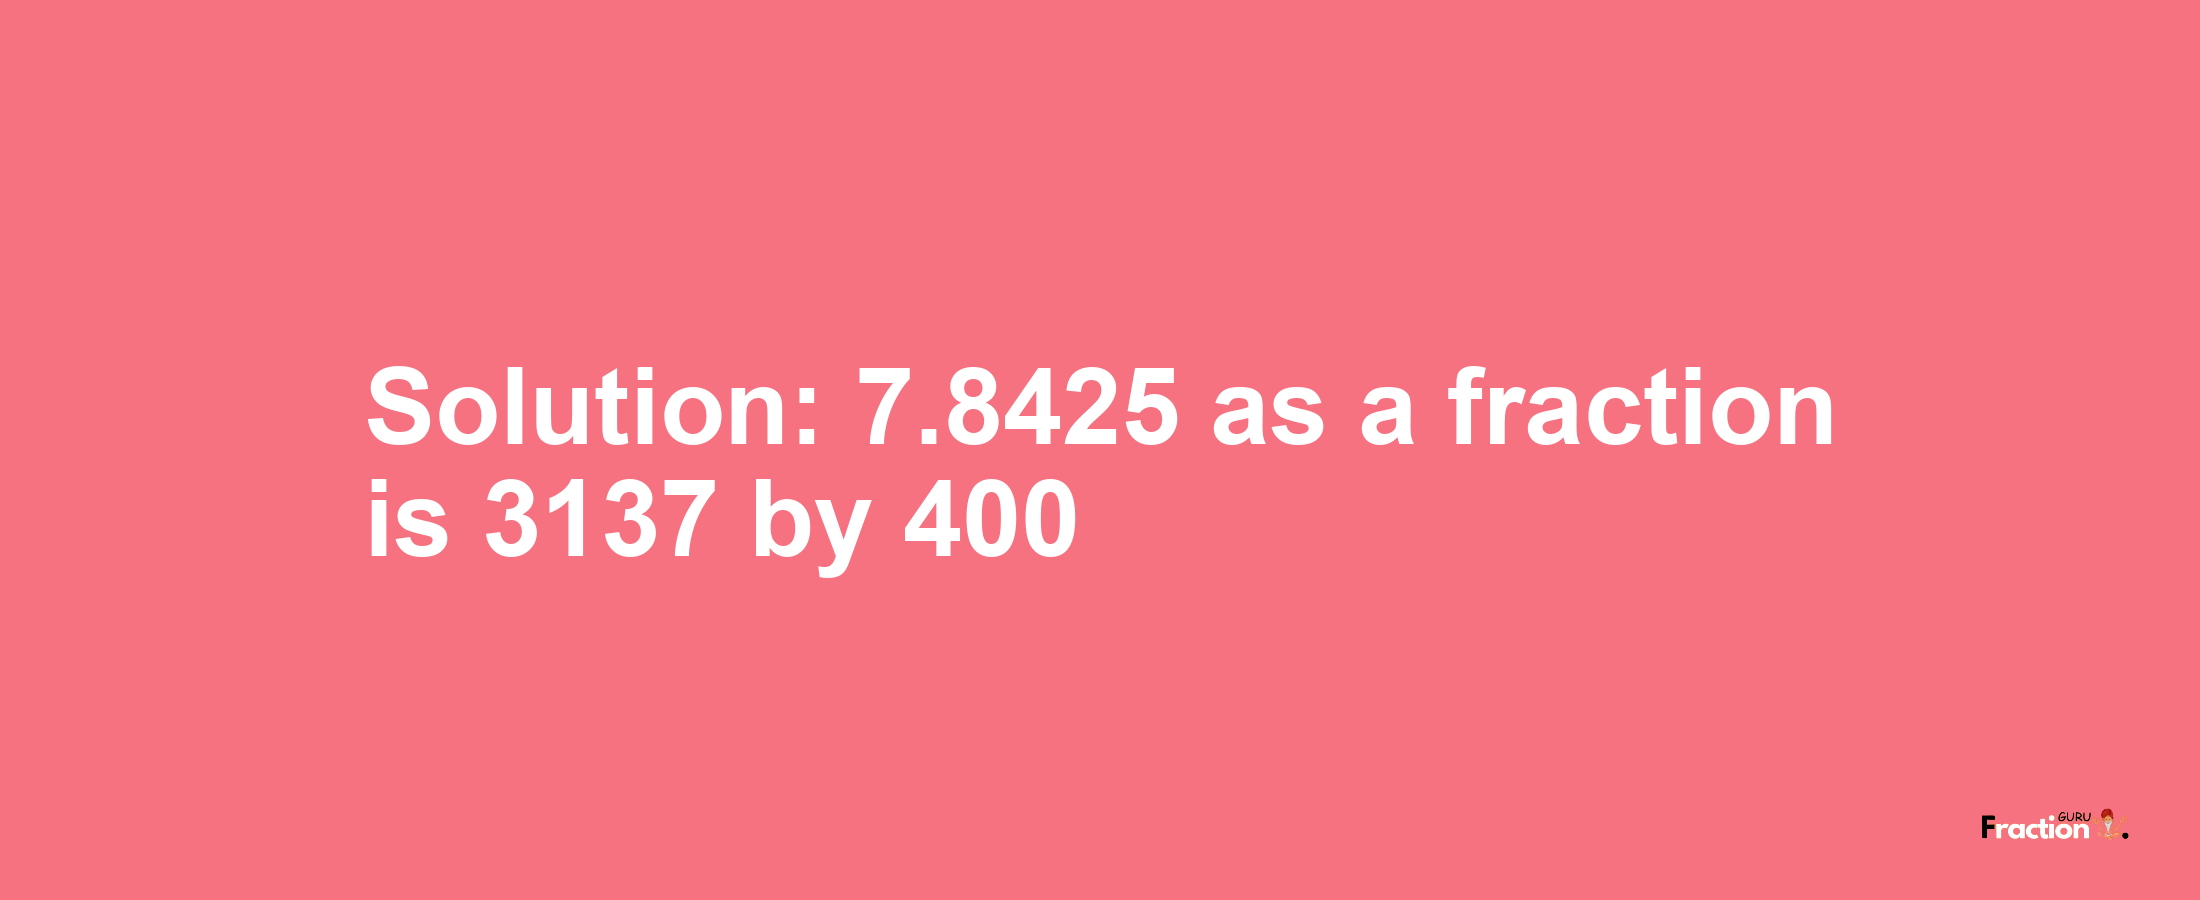 Solution:7.8425 as a fraction is 3137/400